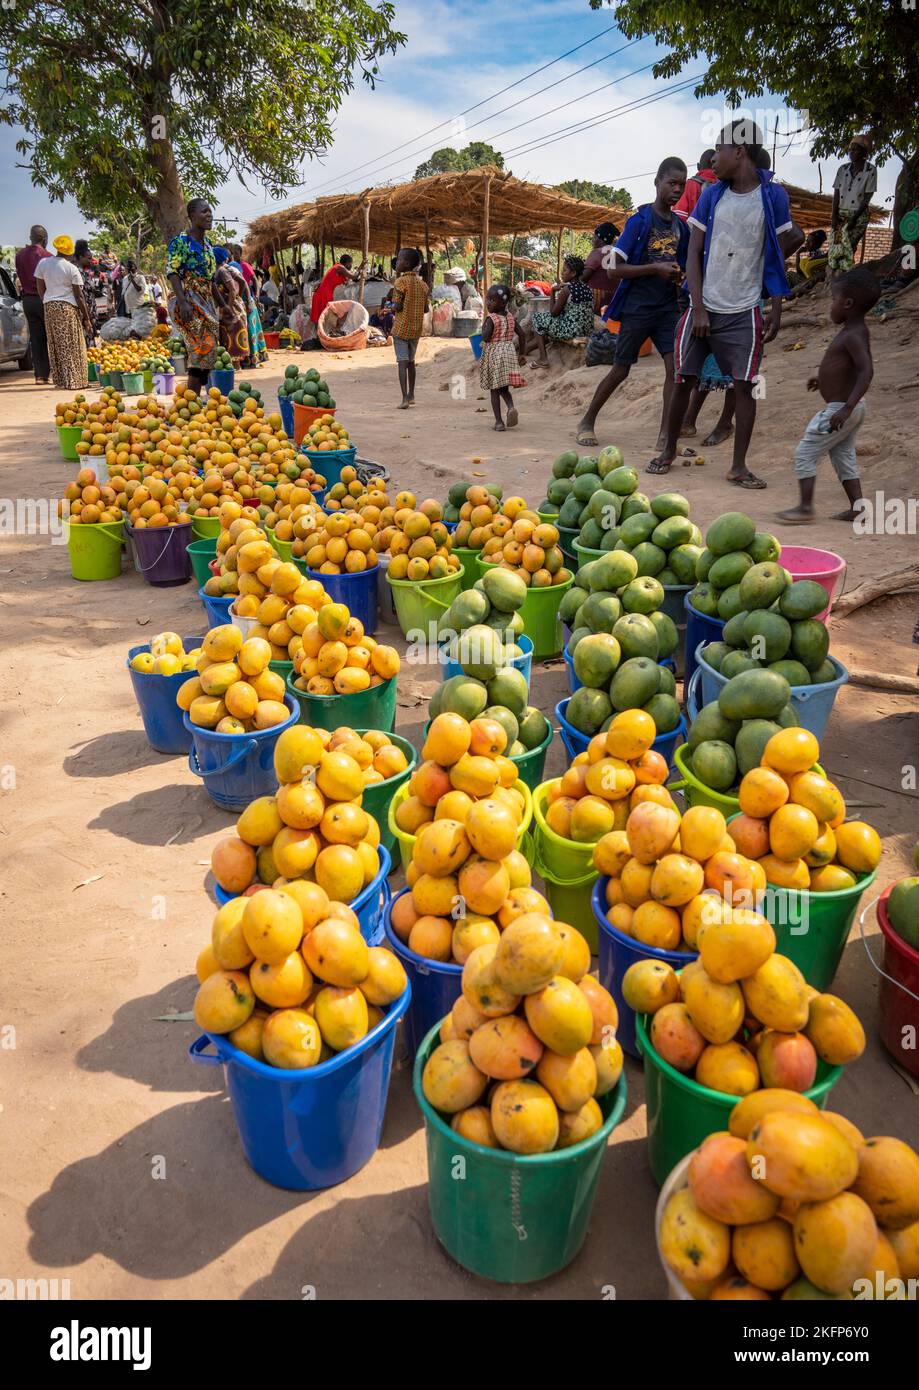 Buckets of mangos for sale by the roadside in rural Malawi Stock Photo